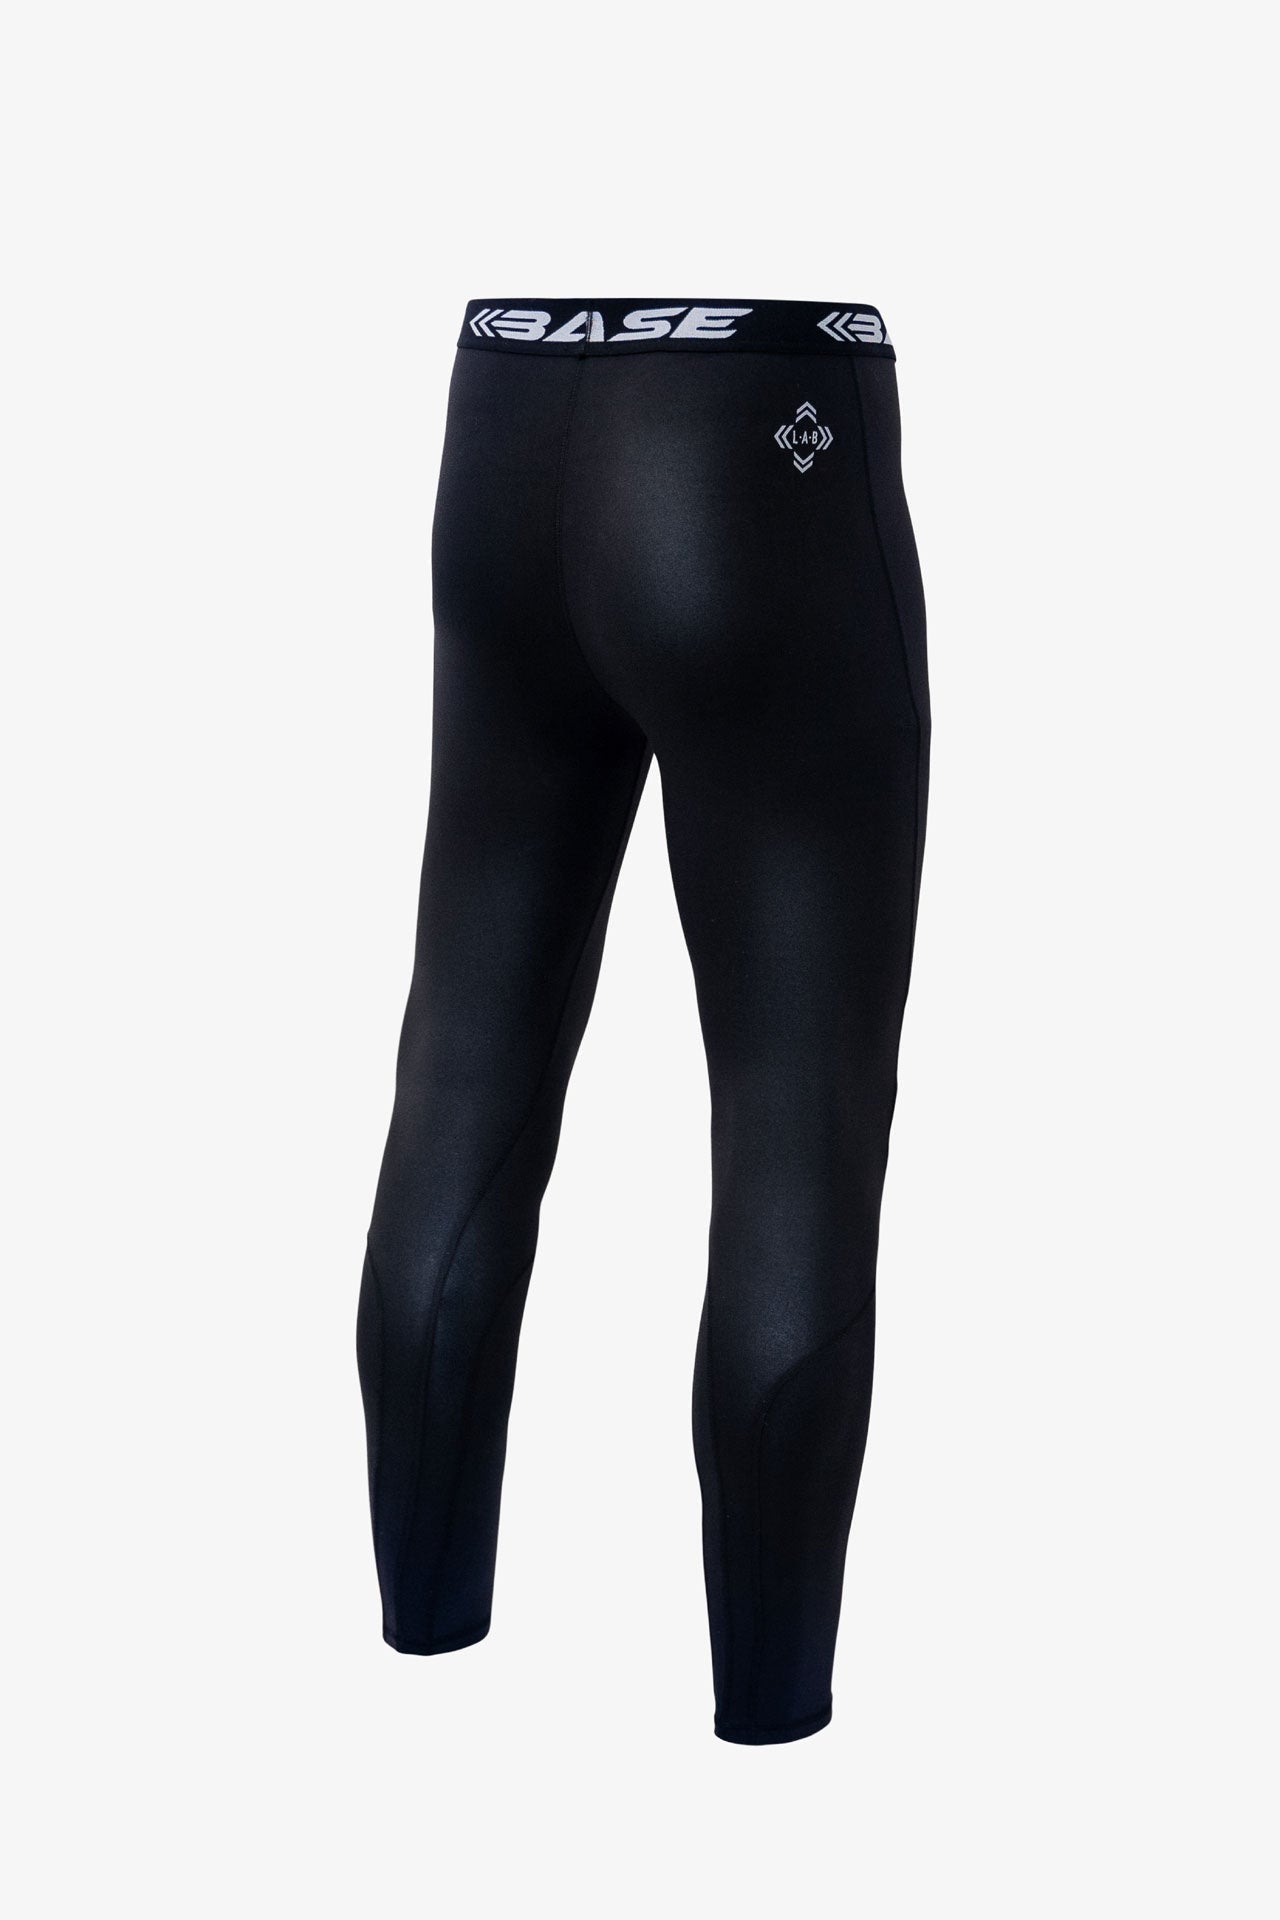 BASE Tight BASE Men's Recovery Tights - Black